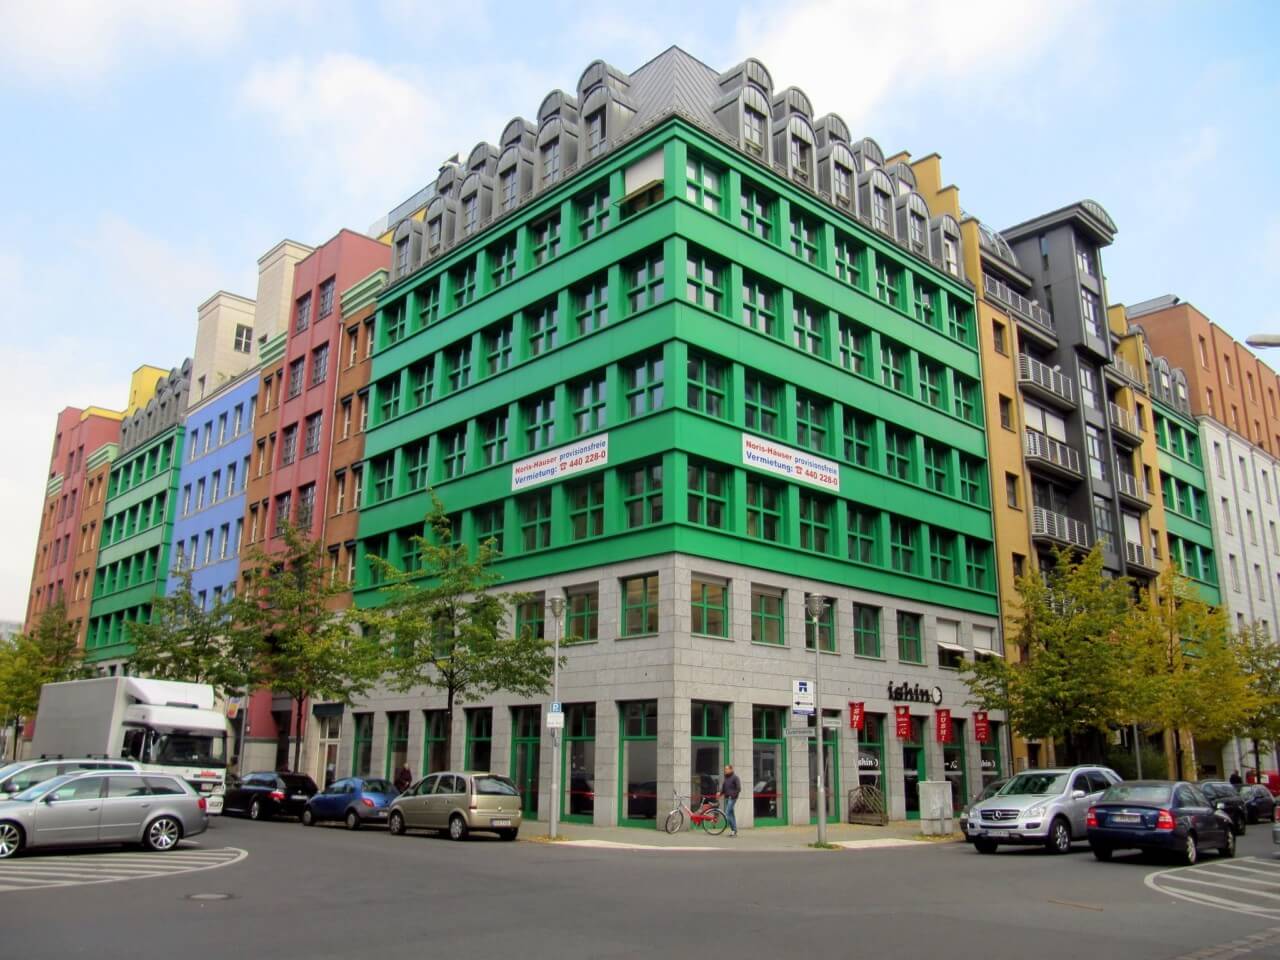 a colorfully painted apartment building in berlin